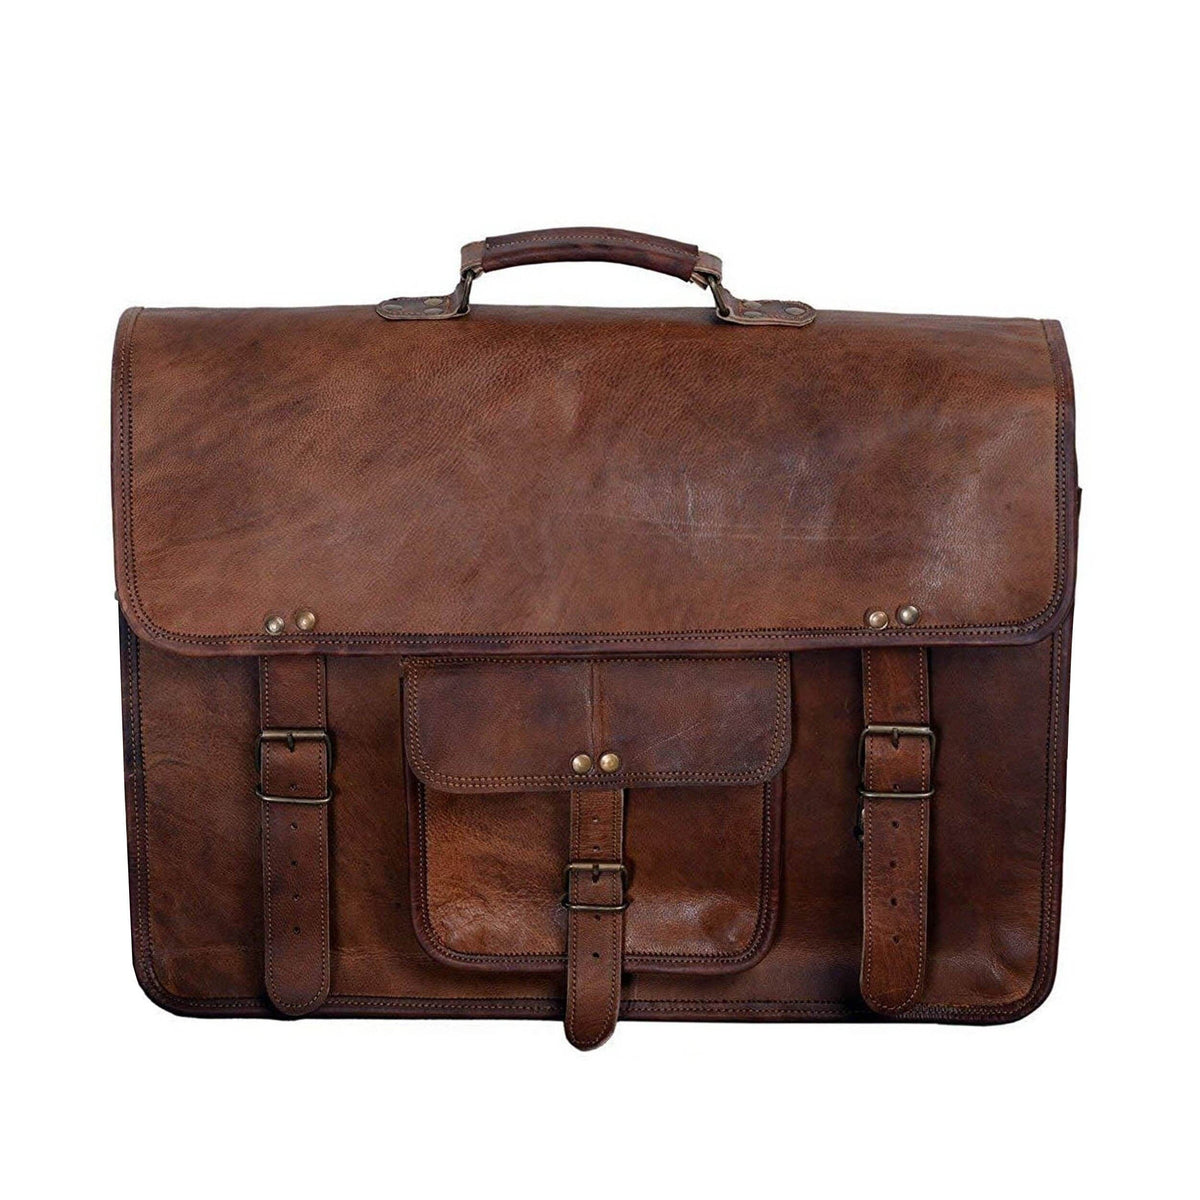 Attorney Leather Briefcase | Men's Leather Briefcase | Classy Leather ...